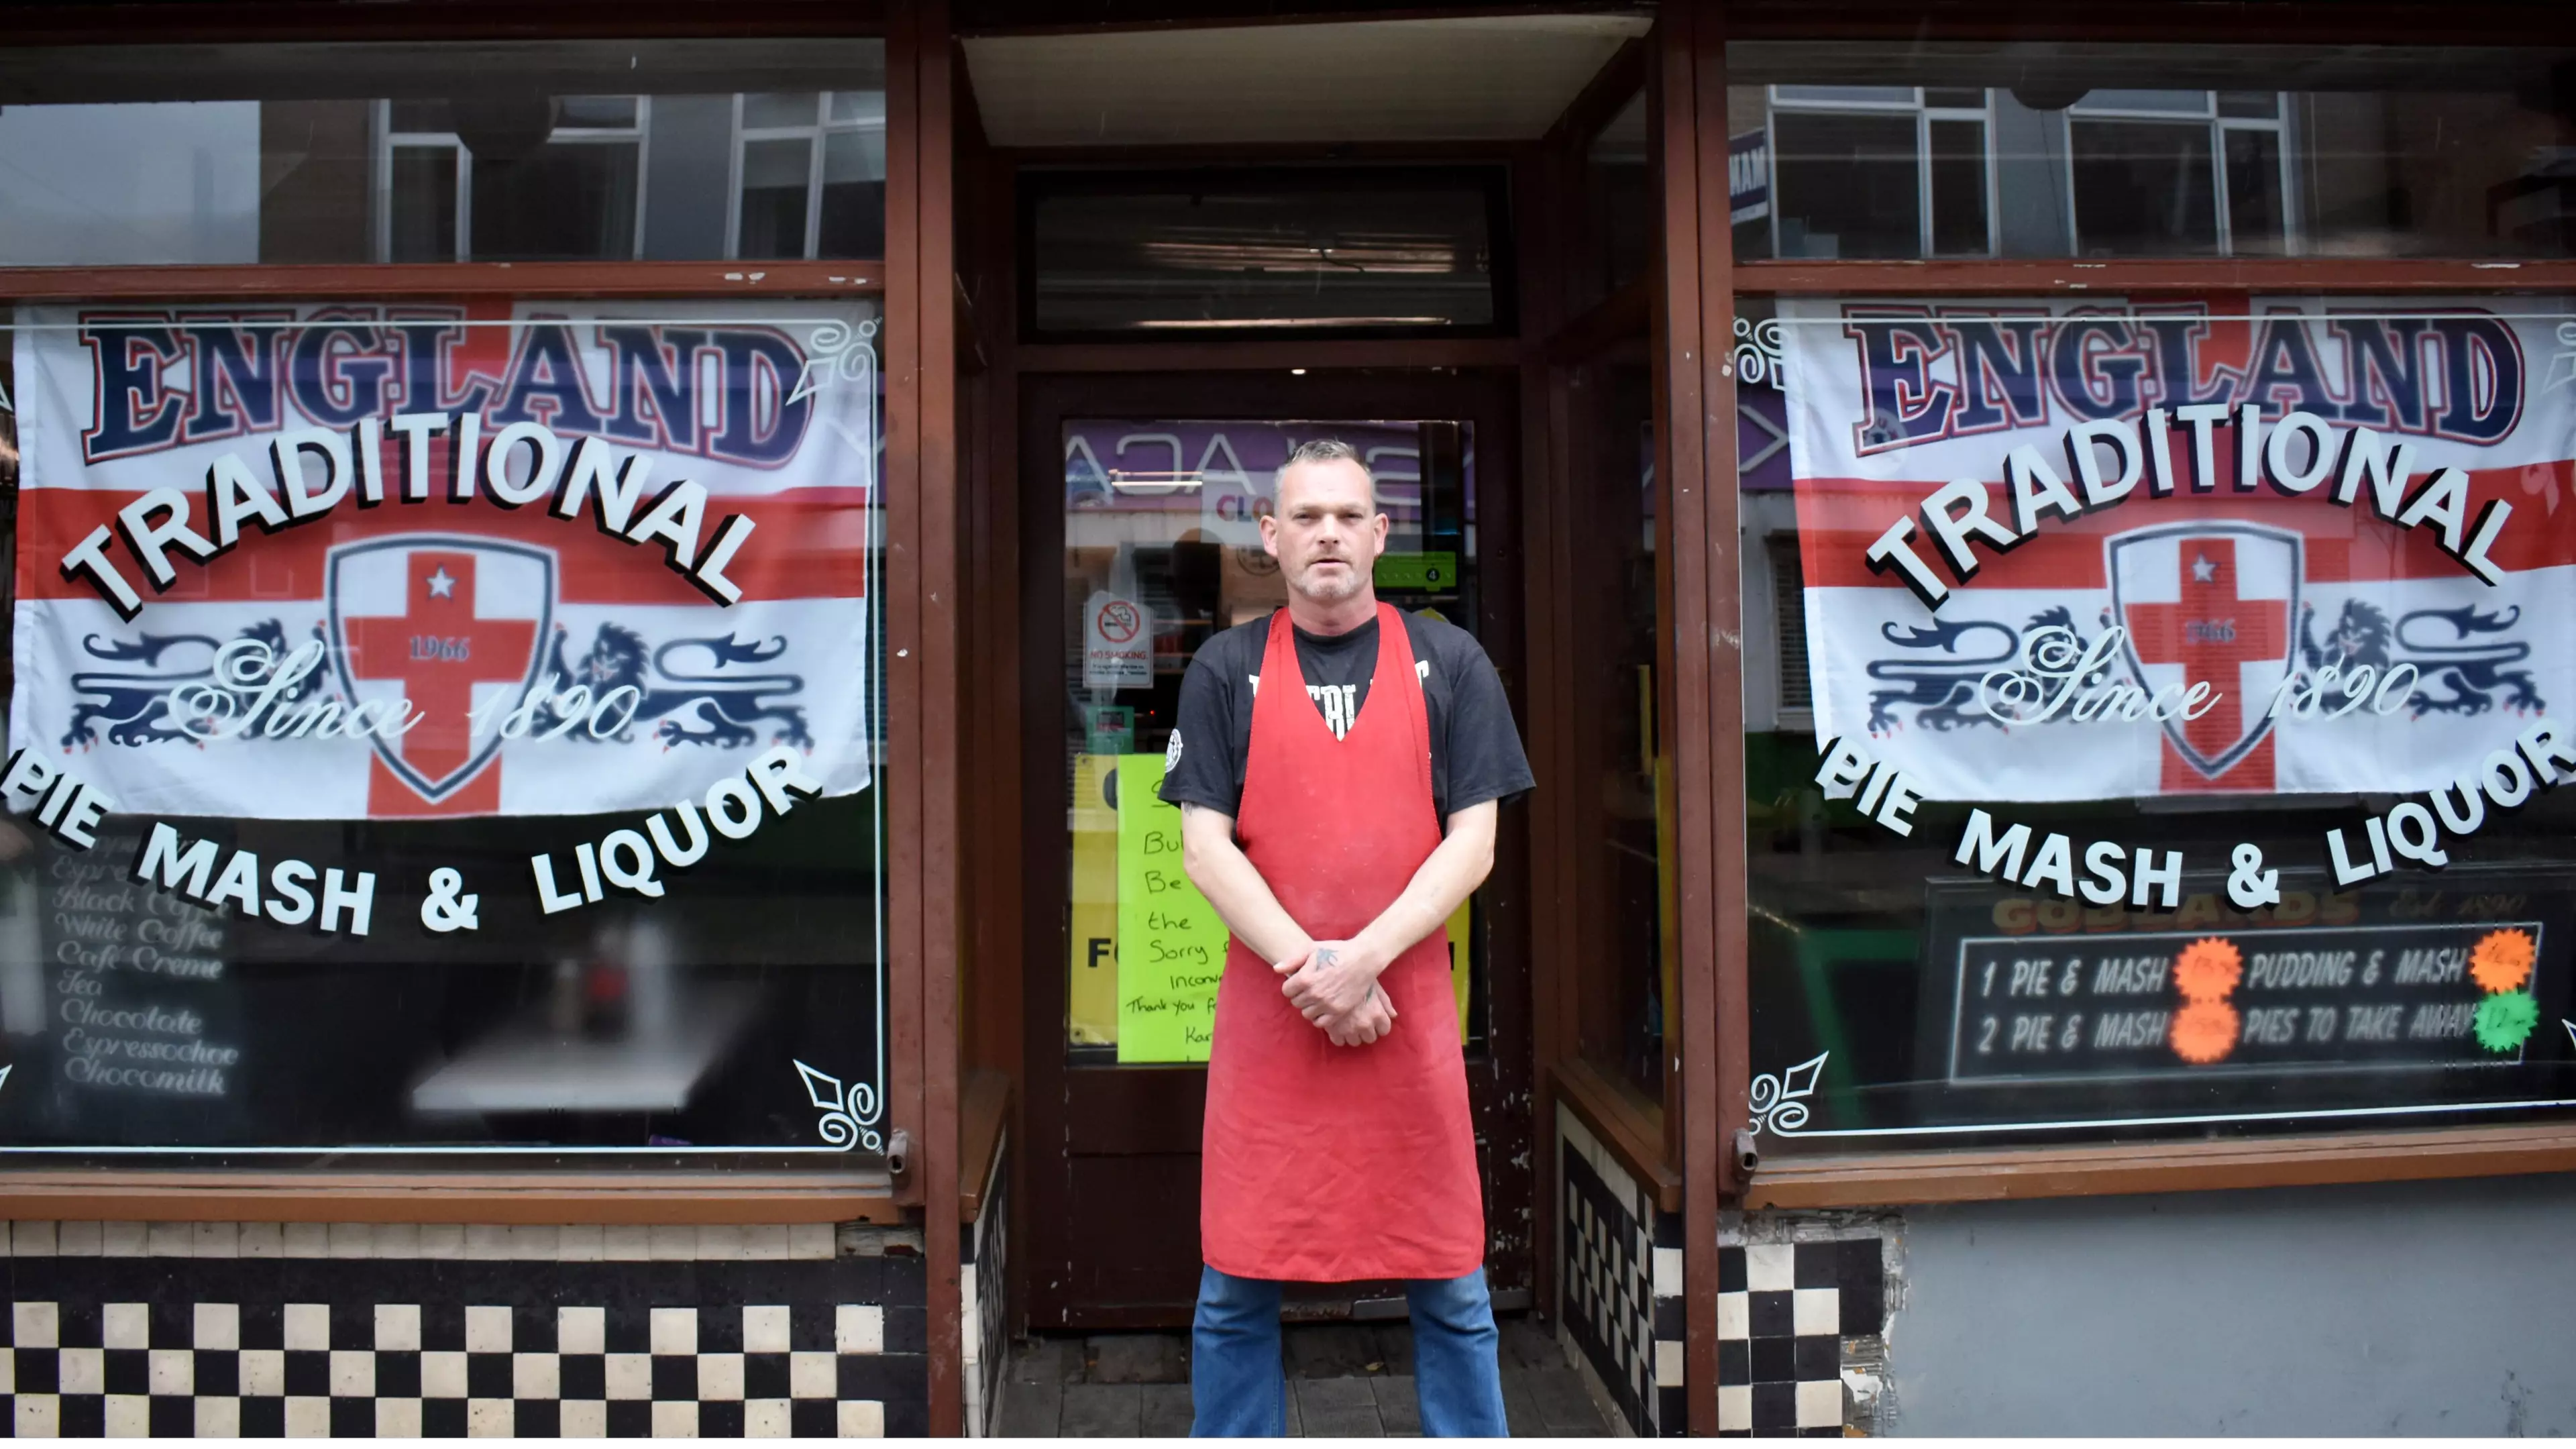 Historic 'Pie And Mash' Shop To Close Because Of 'Fad Diets'